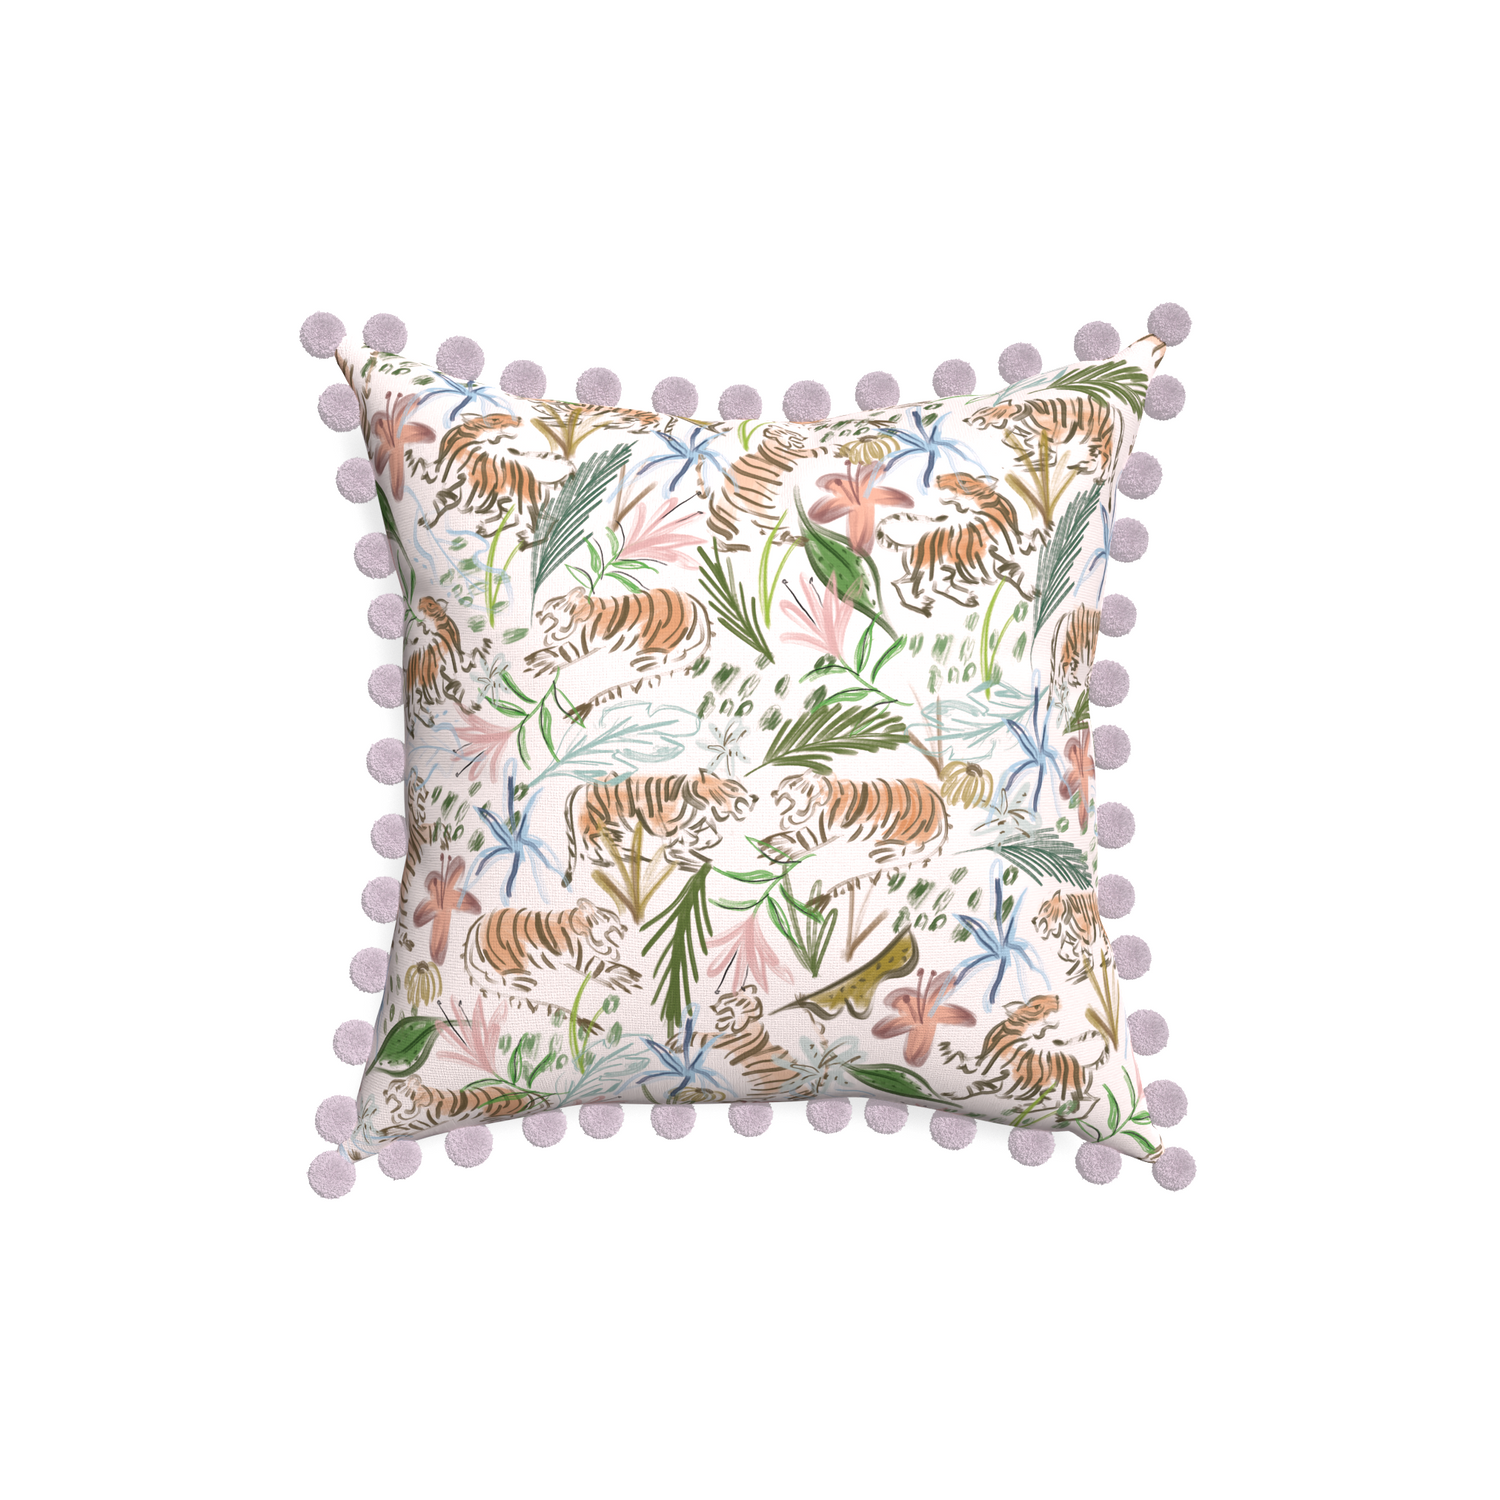 18-square frida pink custom pink chinoiserie tigerpillow with l on white background